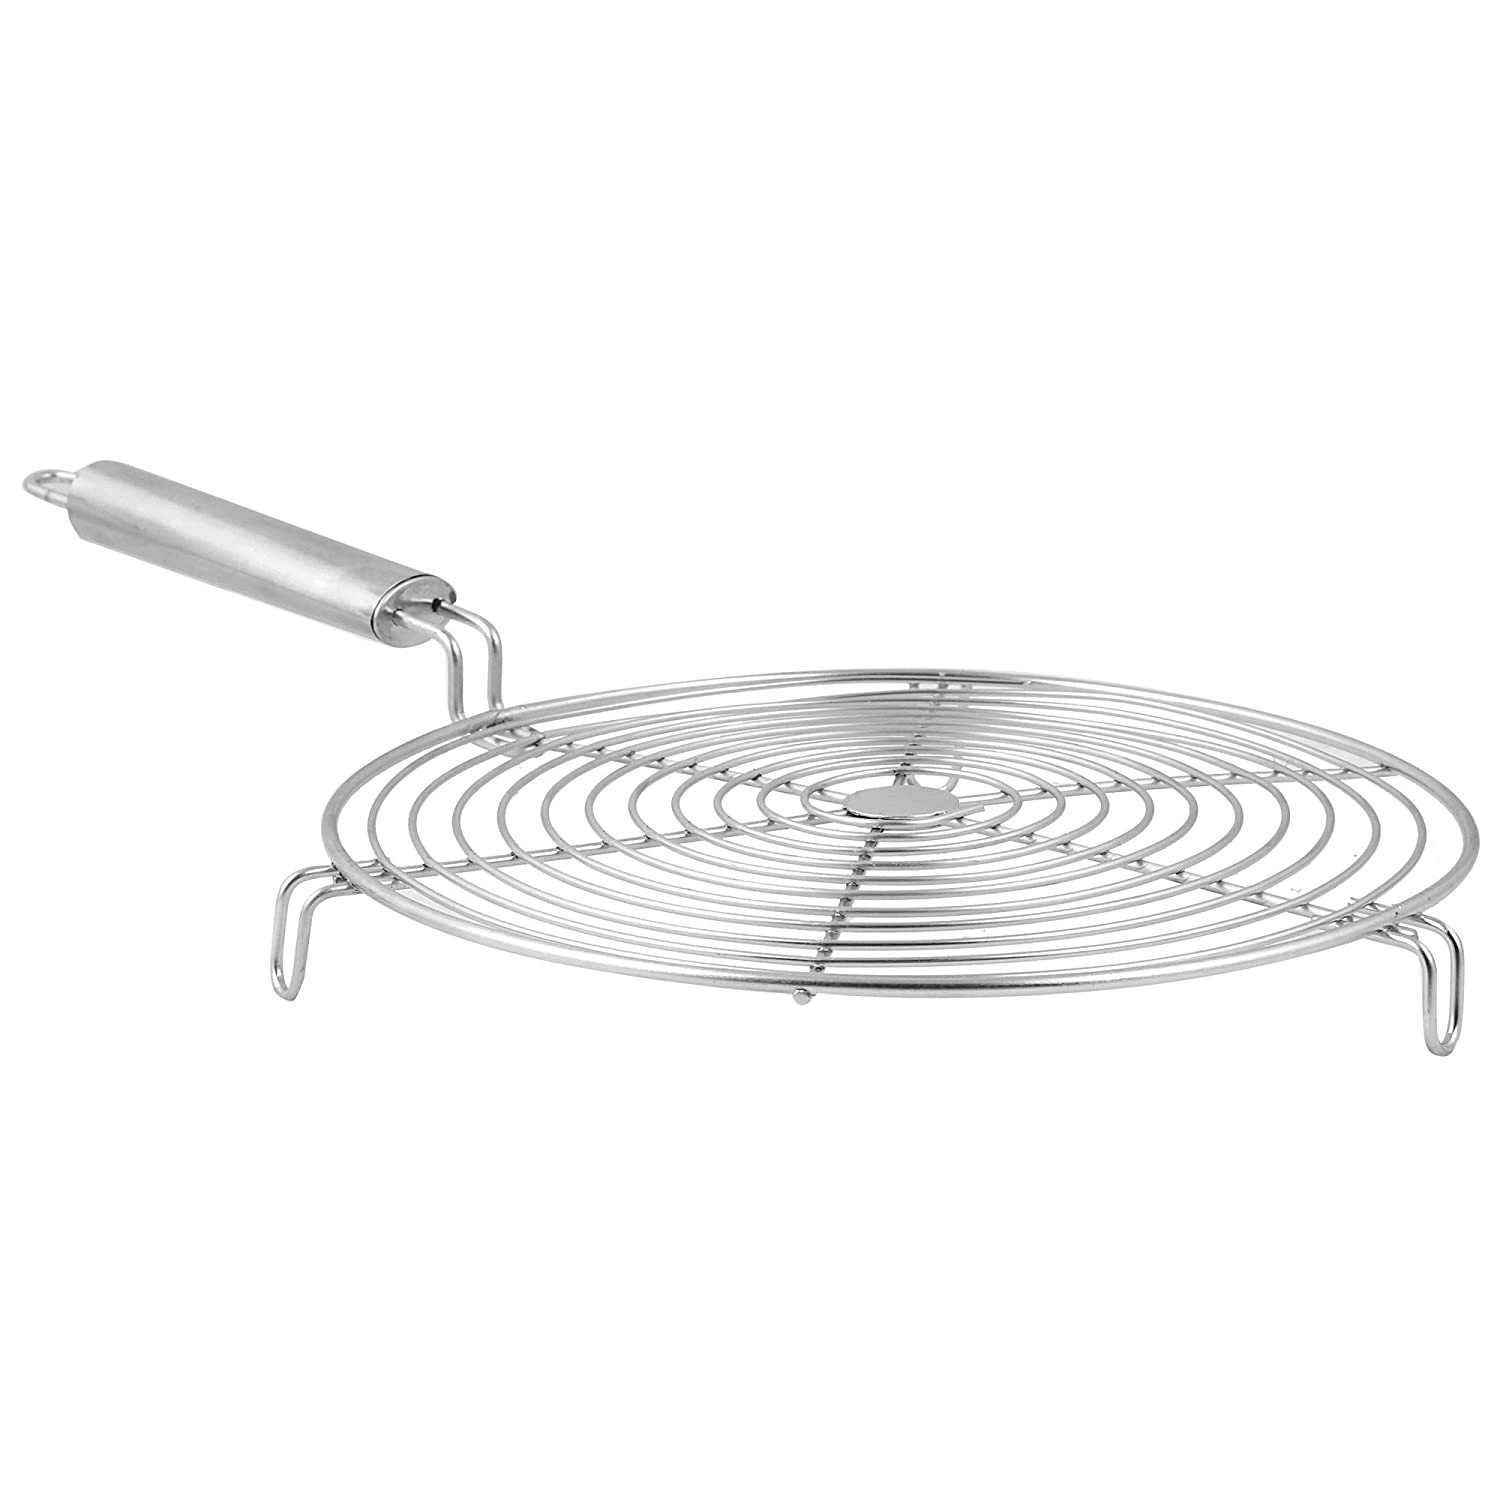 Kuber Industries Large Stainless Steel Round Papad Jali/Roti Roast Grill/Papad Roast Grill with Steel Handle (Silver)